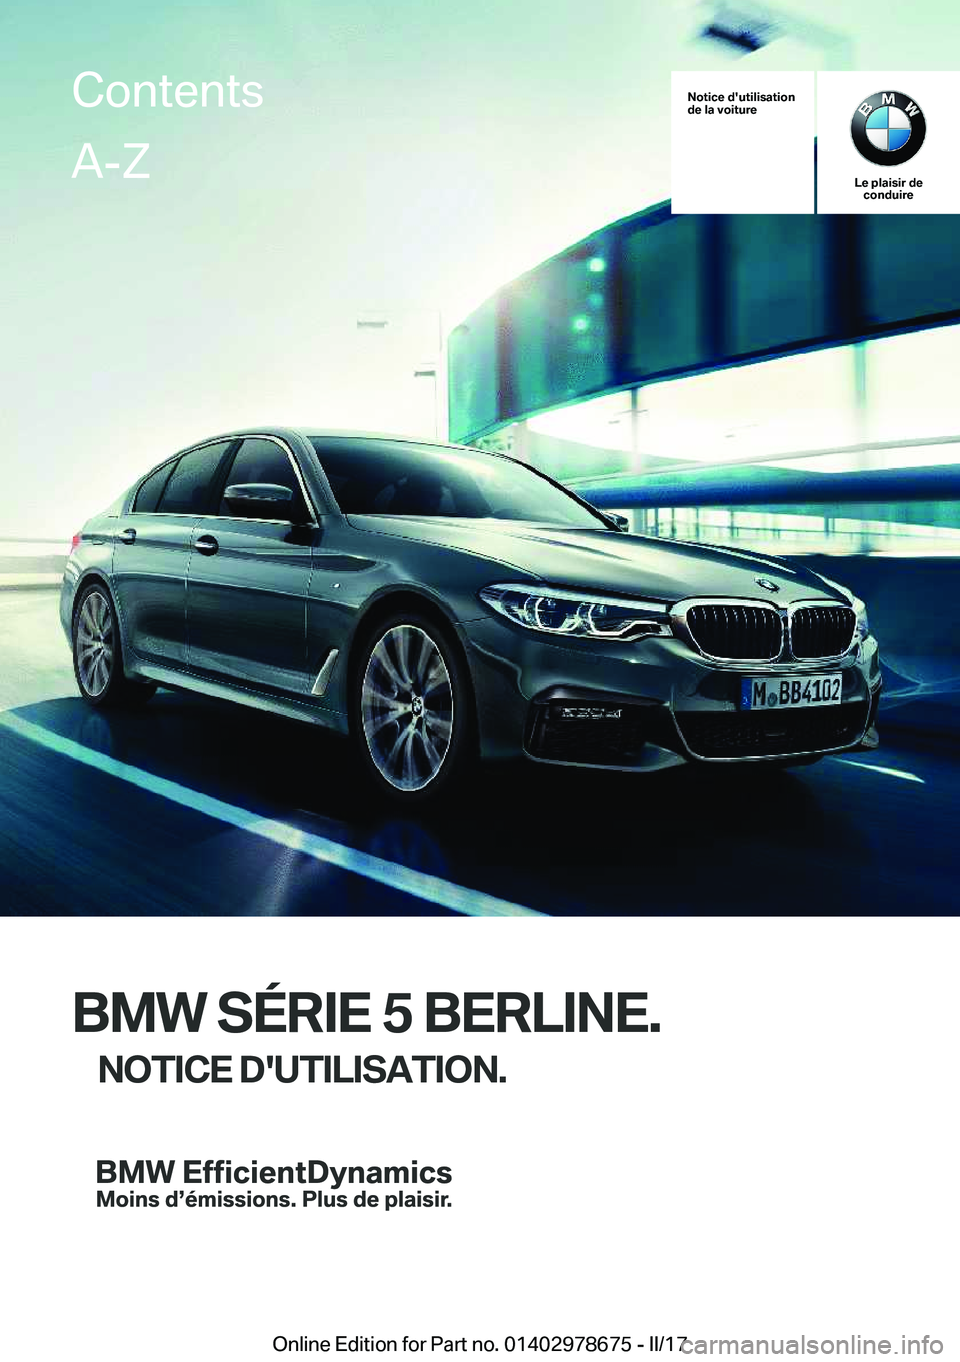 BMW 5 SERIES 2017  Notices Demploi (in French) �N�o�t�i�c�e��d�'�u�t�i�l�i�s�a�t�i�o�n
�d�e��l�a��v�o�i�t�u�r�e
�L�e��p�l�a�i�s�i�r��d�e �c�o�n�d�u�i�r�e
�B�M�W��S�